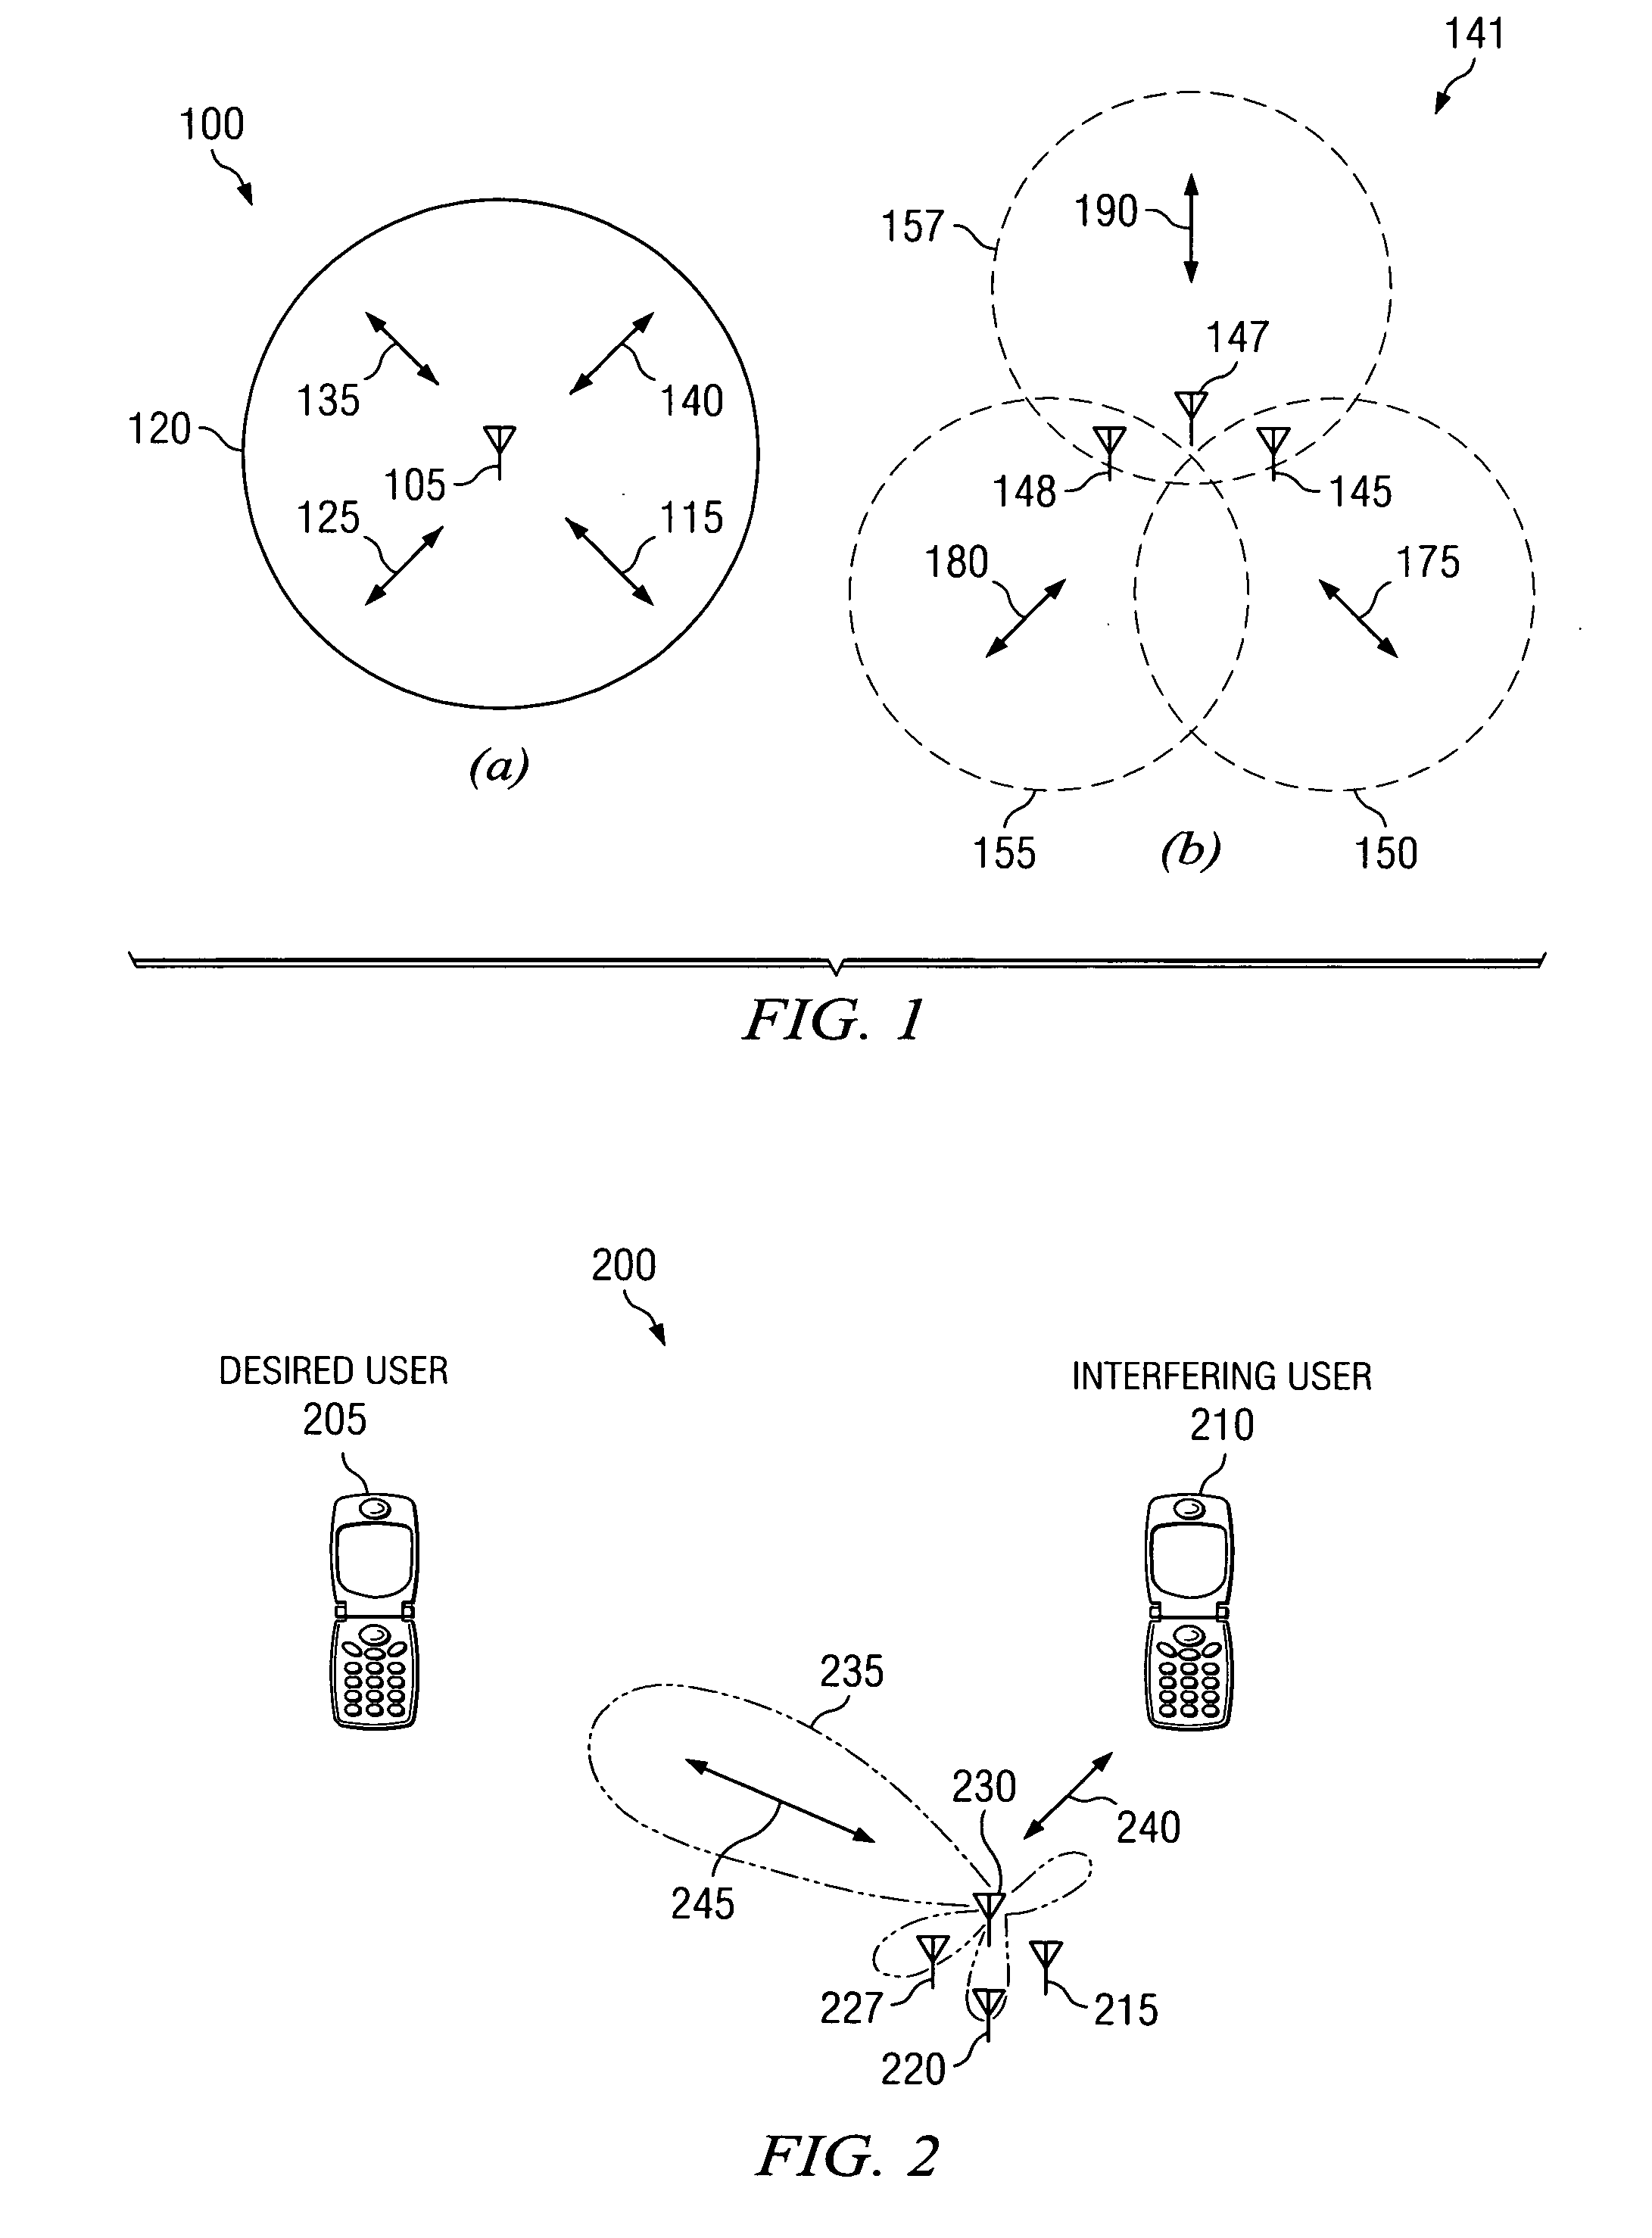 System and Method for Supporting Antenna Beamforming in a Cellular Network